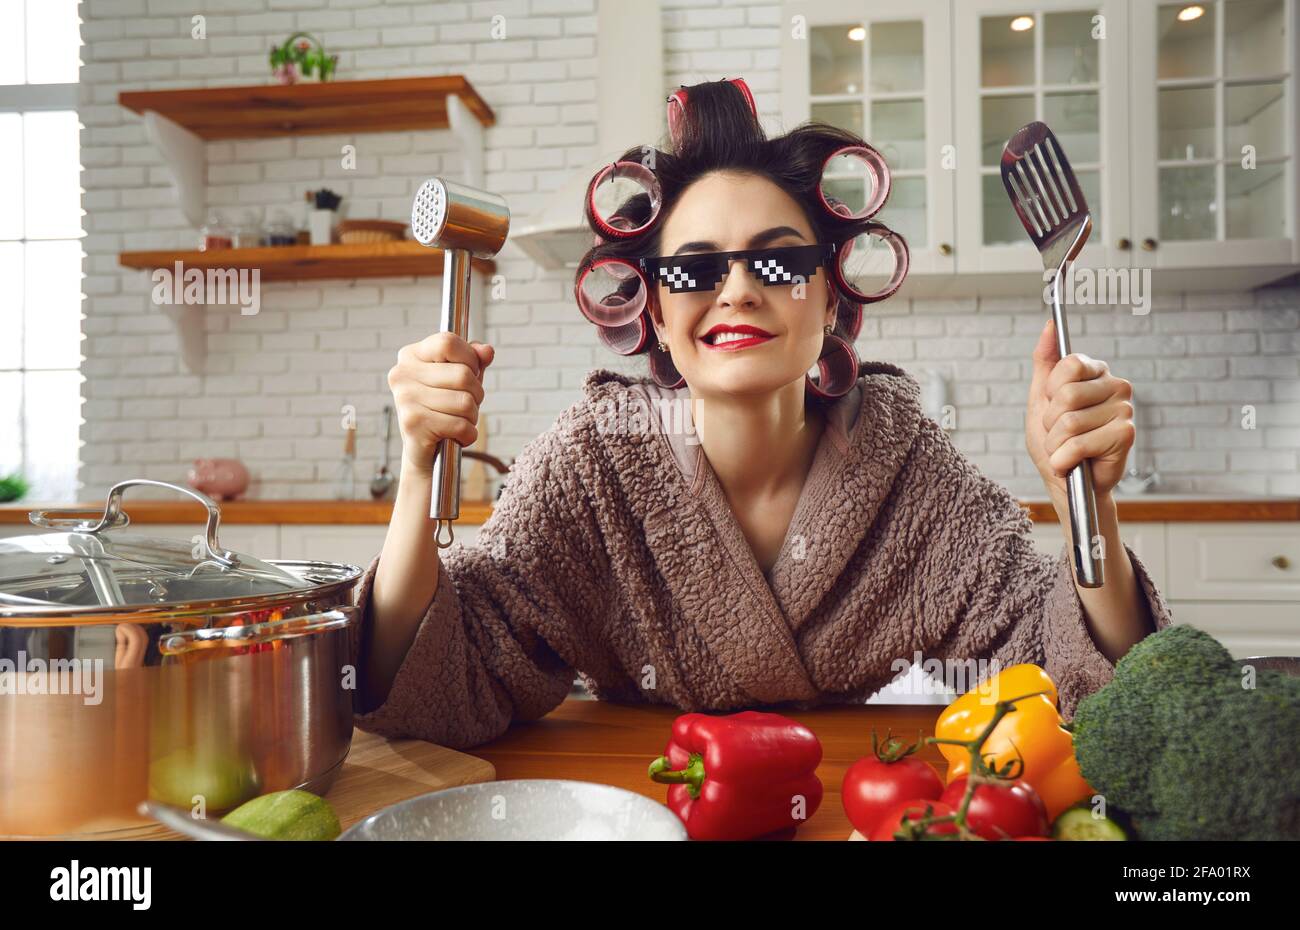 Funny housewife in curlers and thug life glasses holding spatula and meat hammer Stock Photo